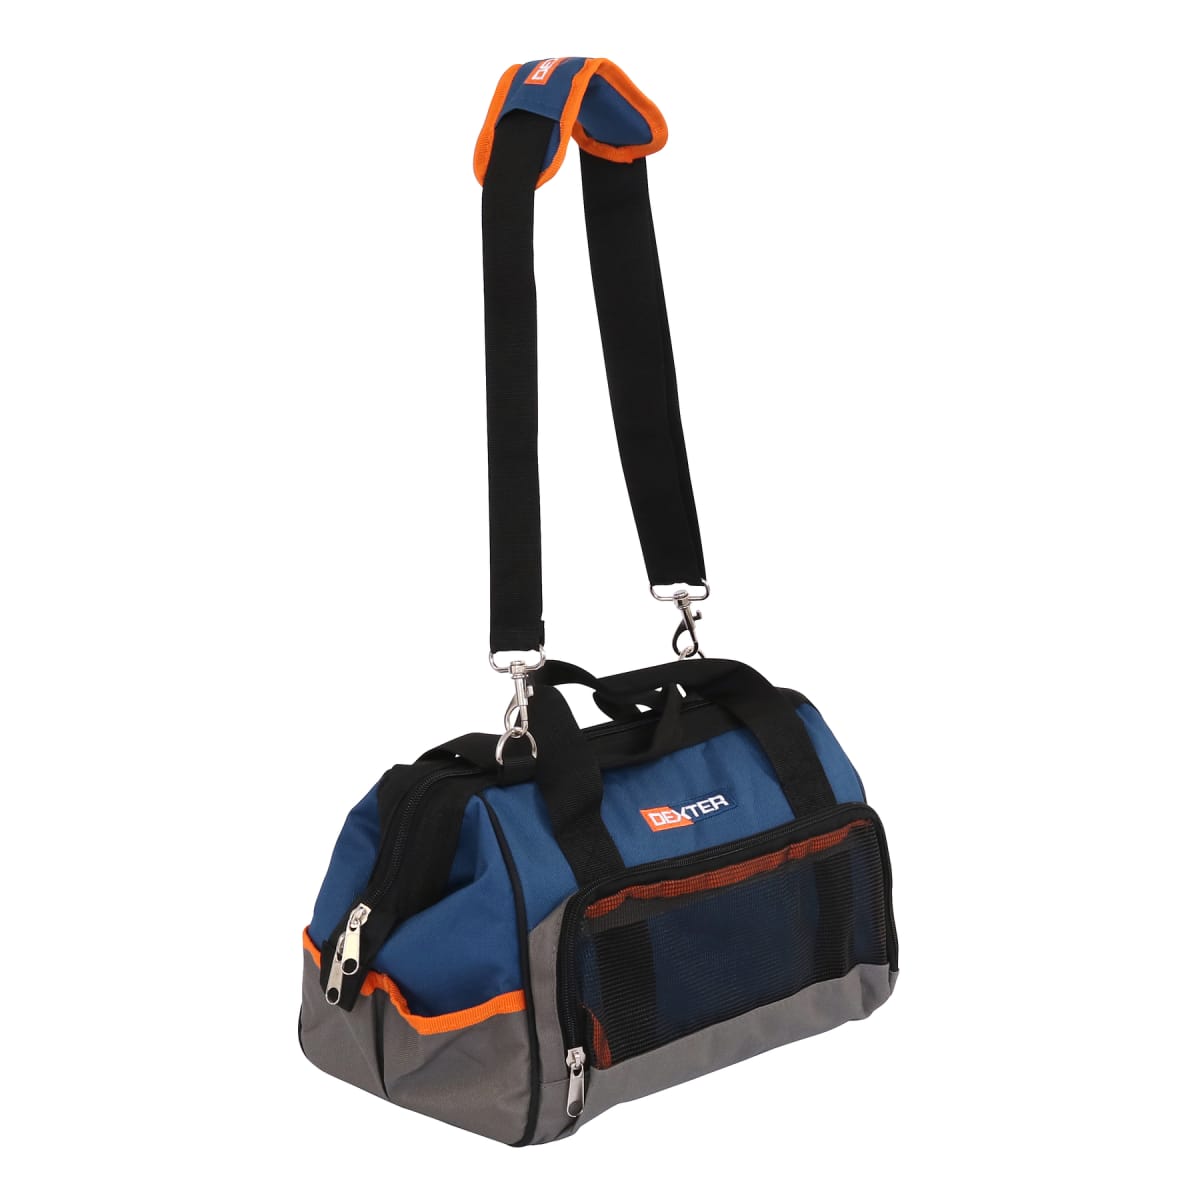 DEXTER FABRIC TOOL BAG MEASURES 34X40X22CM WITH 14 COMPARTMENTS